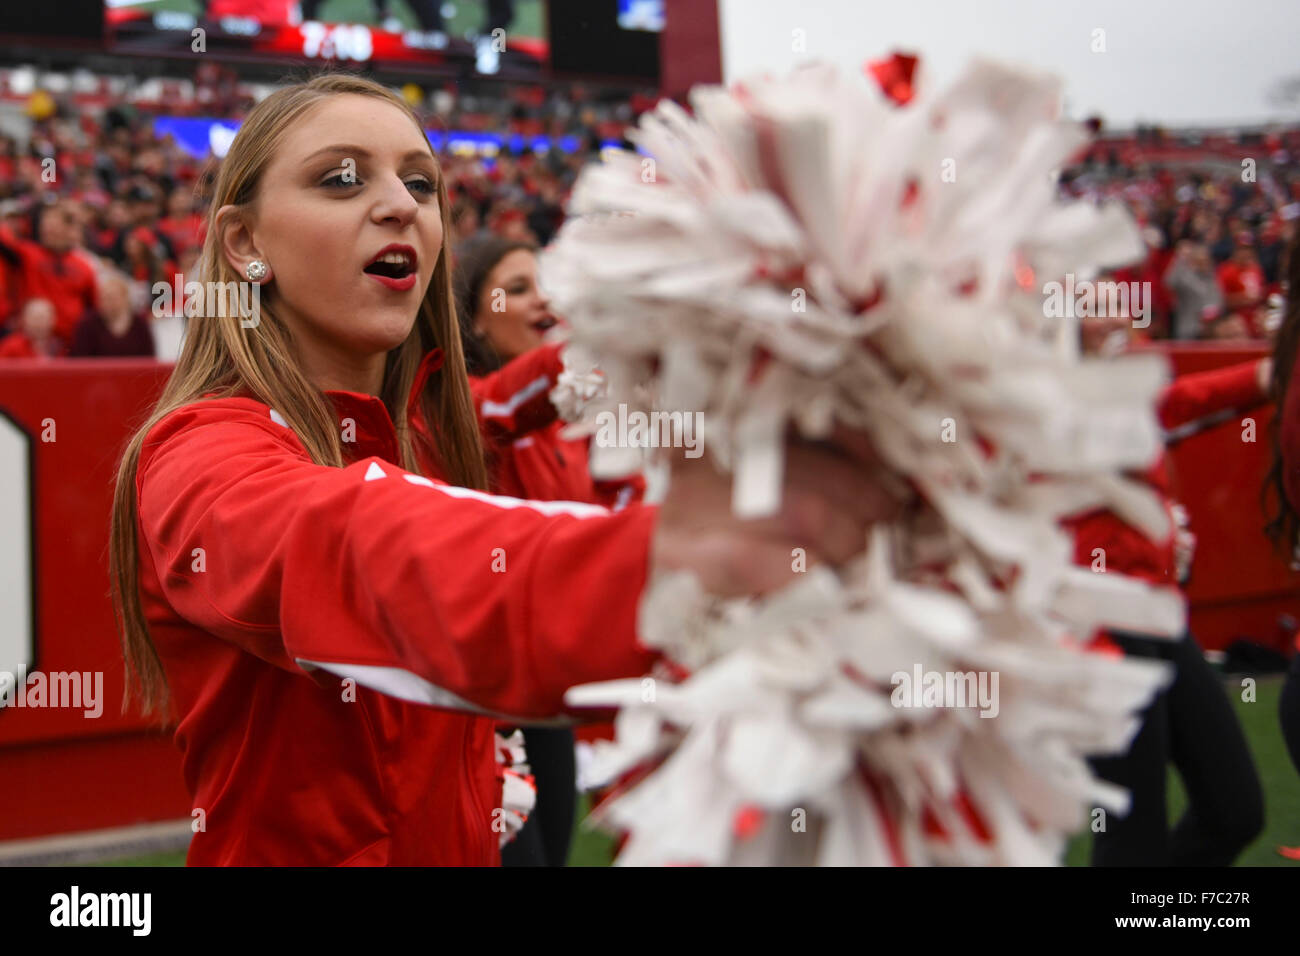 Piscataway, NJ, USA. 28th Nov, 2015. A Rutgers Scarlet Knights cheerleader performs during the game between The Maryland Terrapins and Rutgers Scarlet Knights at Highpoint Solutions Stadium in Piscataway, NJ. Mandatory Credit: Kostas Lymperopoulos/CSM, © csm/Alamy Live News Stock Photo